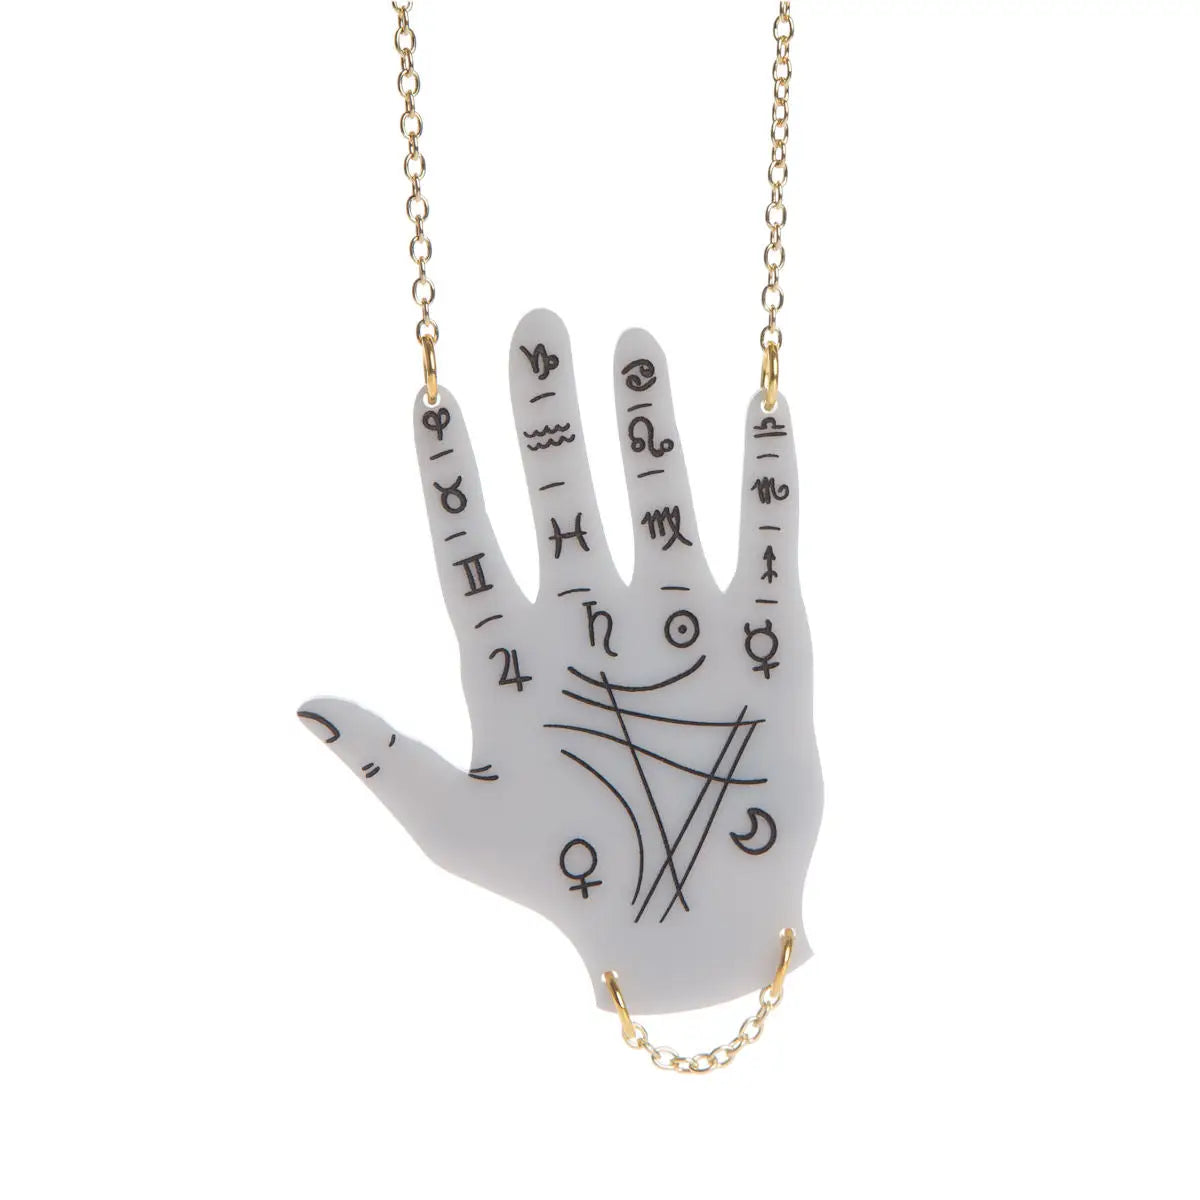 laser-cut light grey acrylic hand engraved and hand-painted with symbols used in the art of palm reading with a delicate gold metal chain hanging from the wrist- hung on an 18” gold plated chain